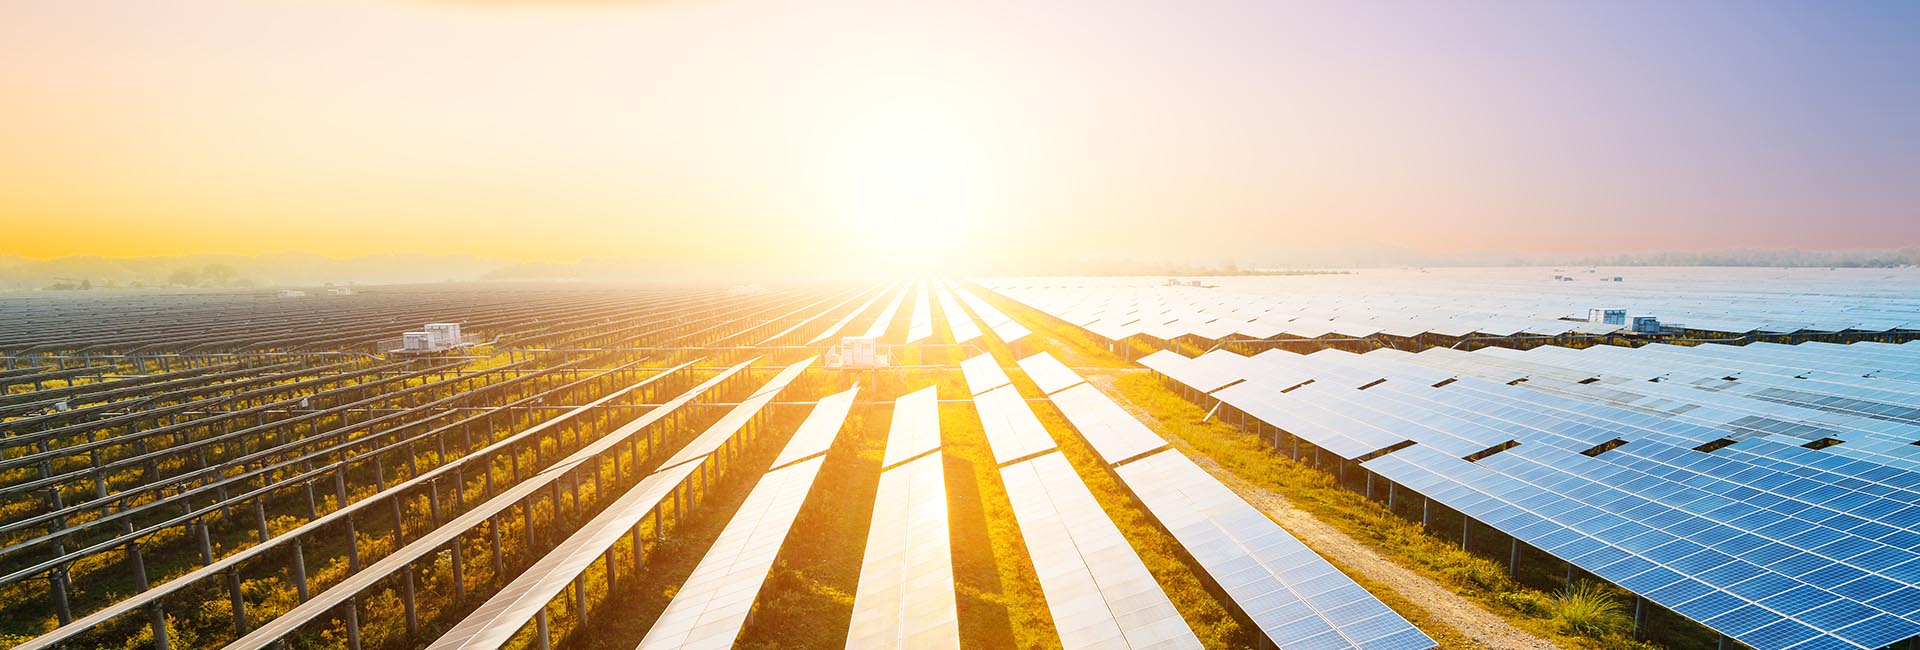 After the Inflation Reduction Act: Solar’s New Horizon